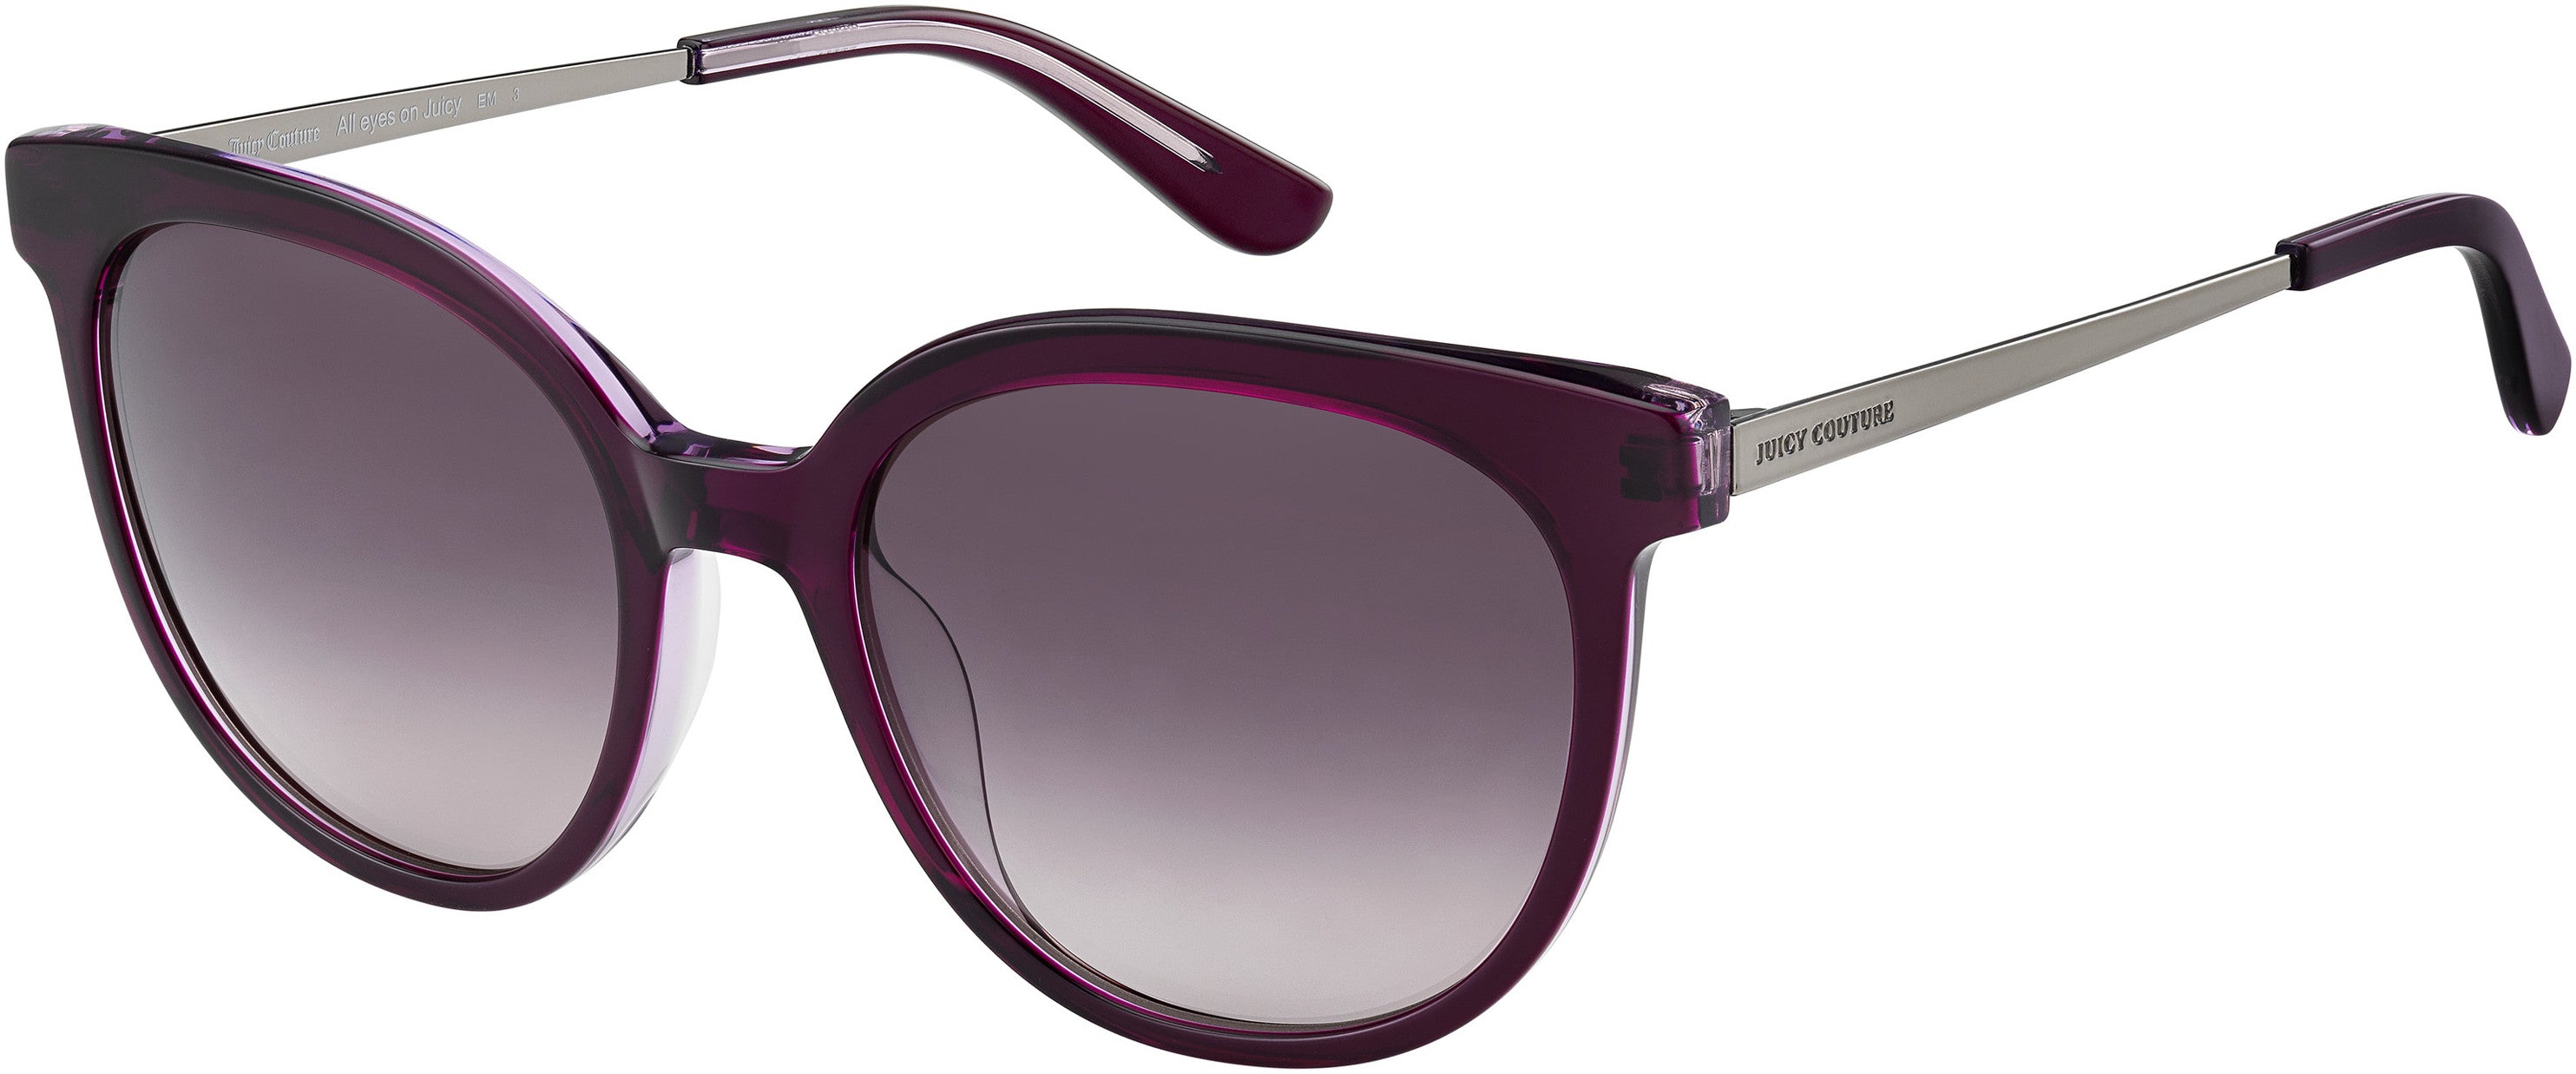 Juicy Couture Juicy 610/G/S Oval Modified Sunglasses 0YZC-0YZC  Violet Rust Violet (3X Burgundy Shaded)